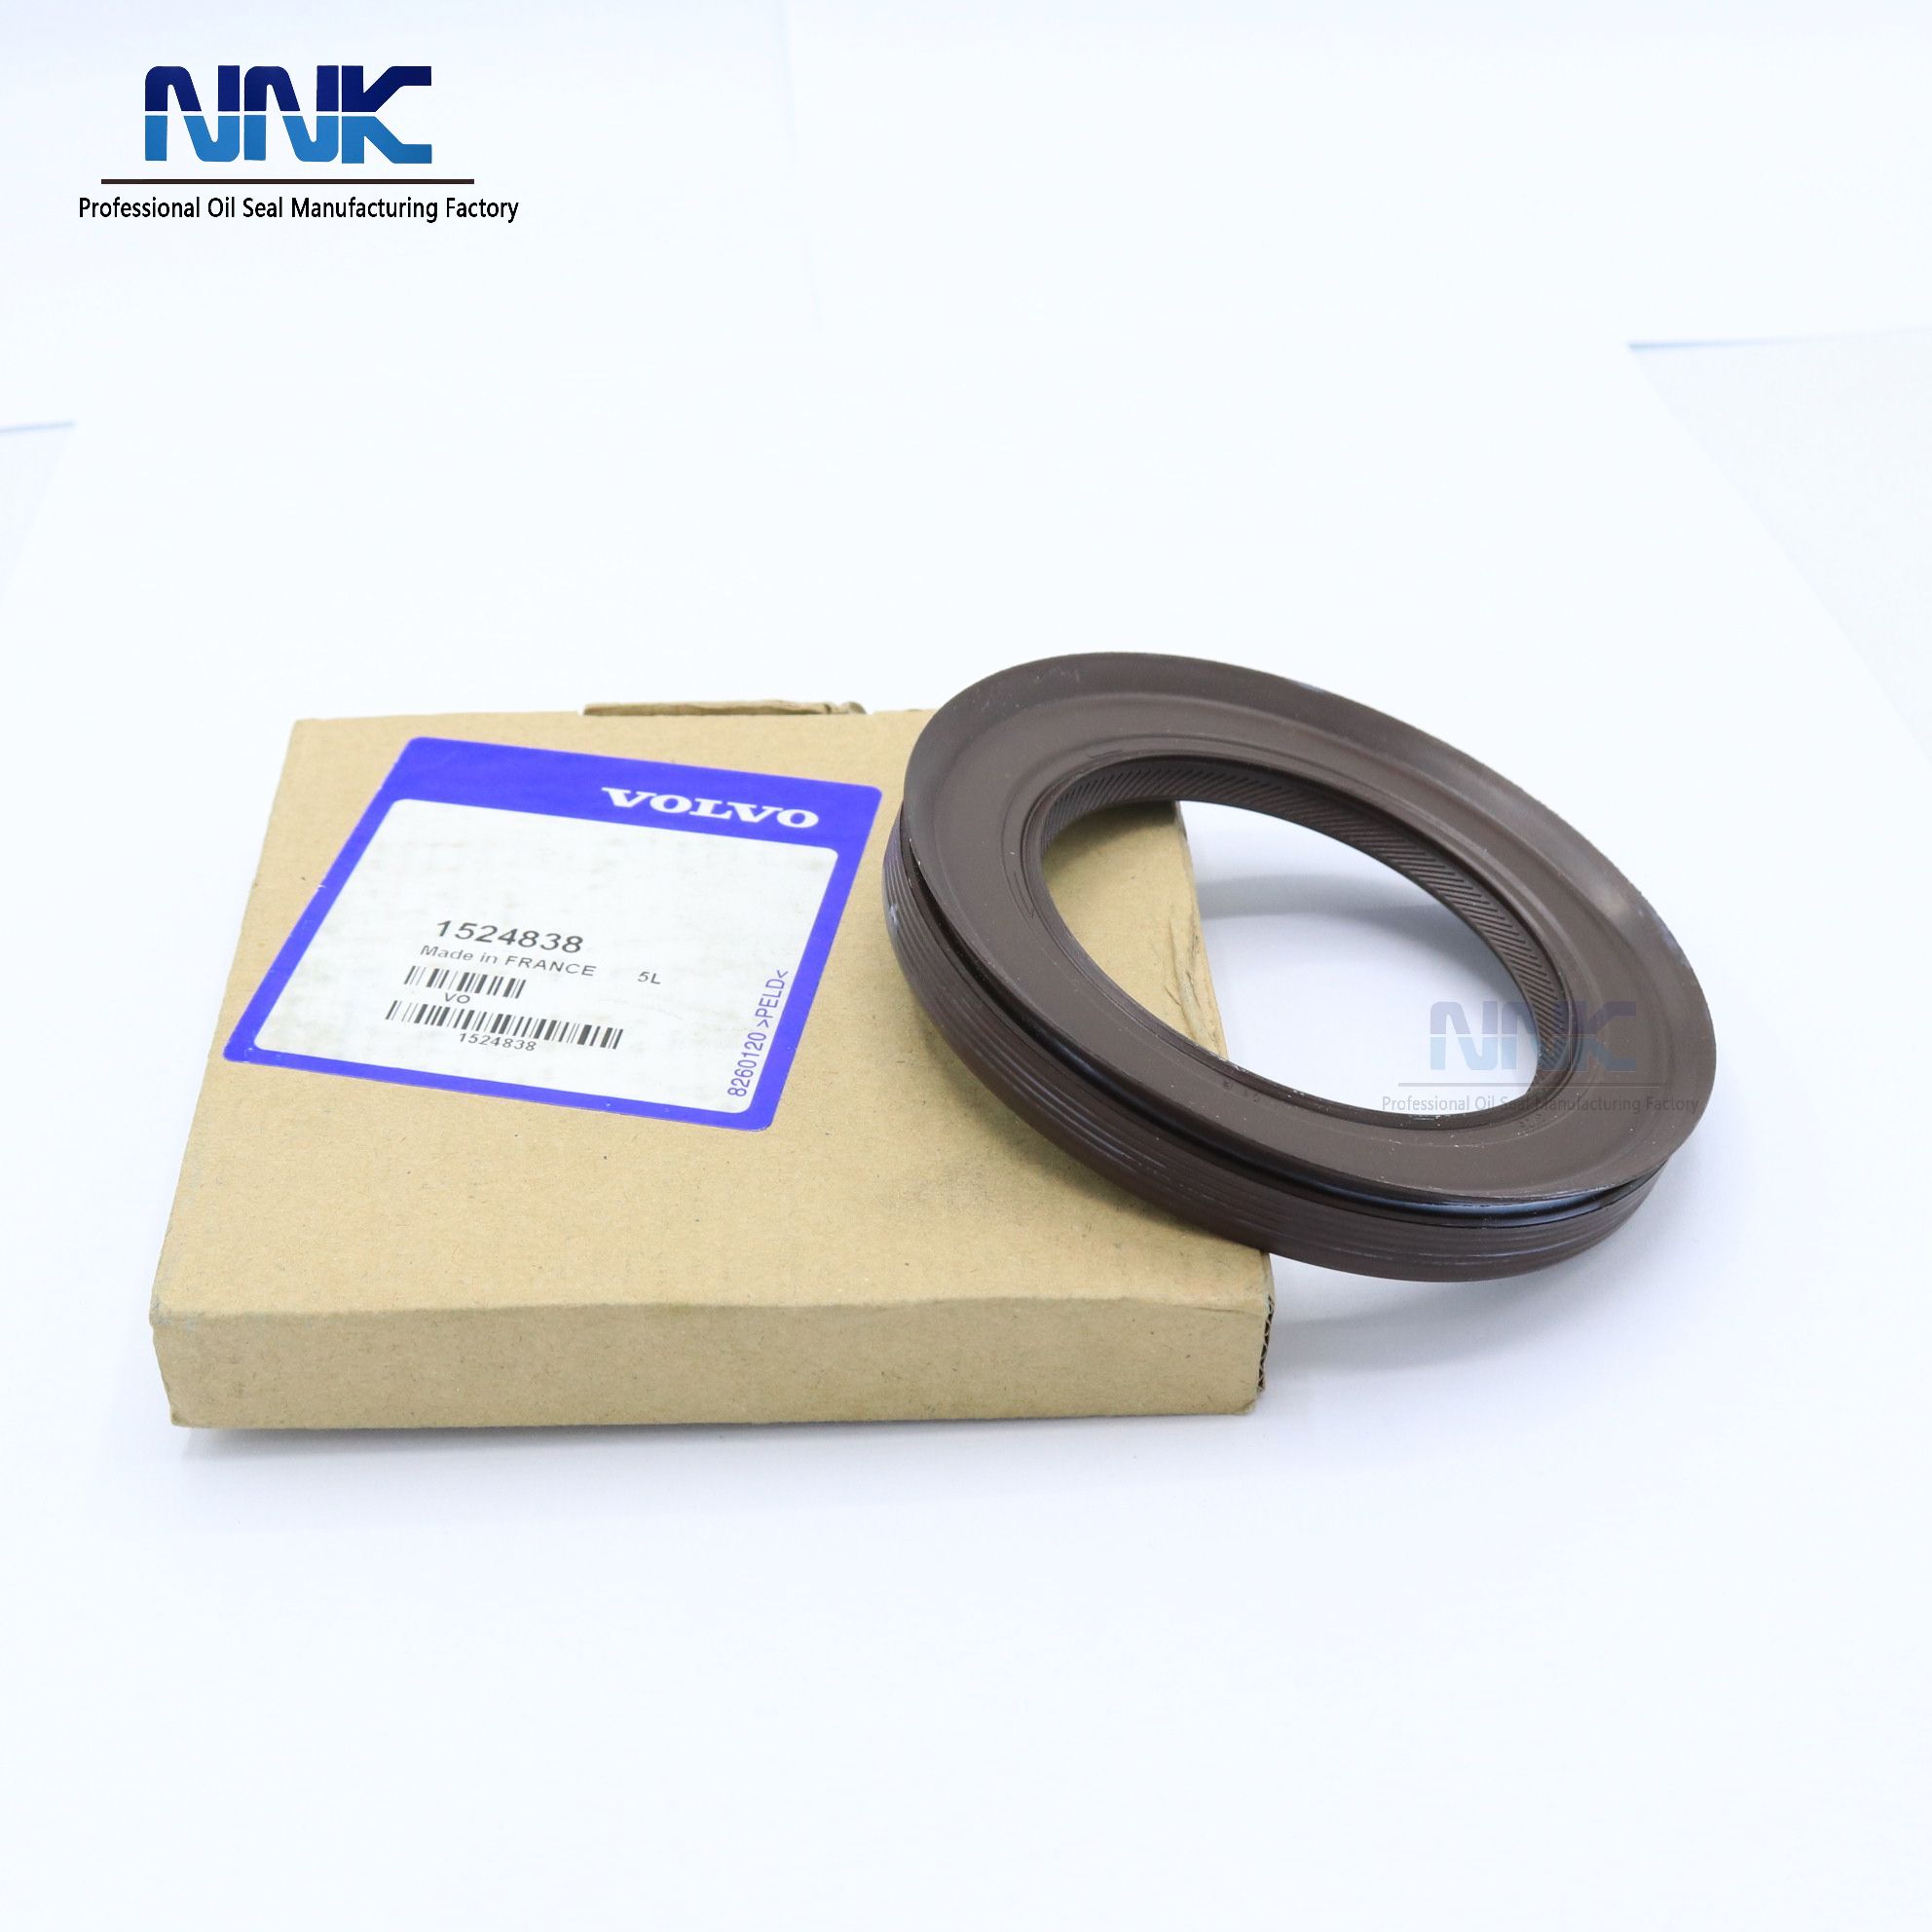 Shaft Oil Seal Rear Axle Seal 1524838 DT 2.35064 Oil Seal For Volvo